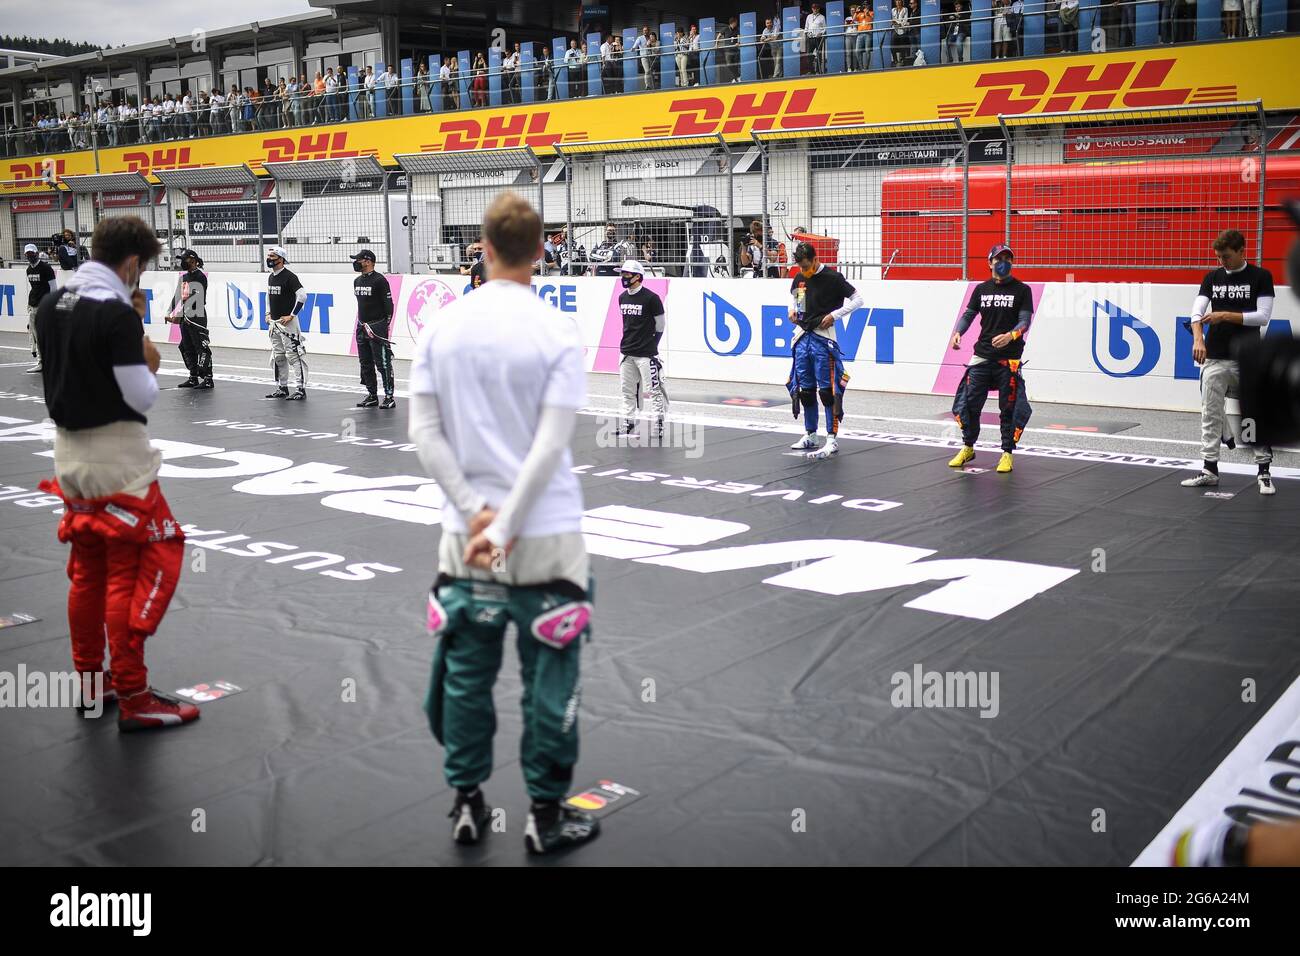 Drivers on the grid. Austrian Grand Prix, Sunday 4th July 2021. Spielberg, Austria. FIA Pool Image for Editorial Use Only Stock Photo